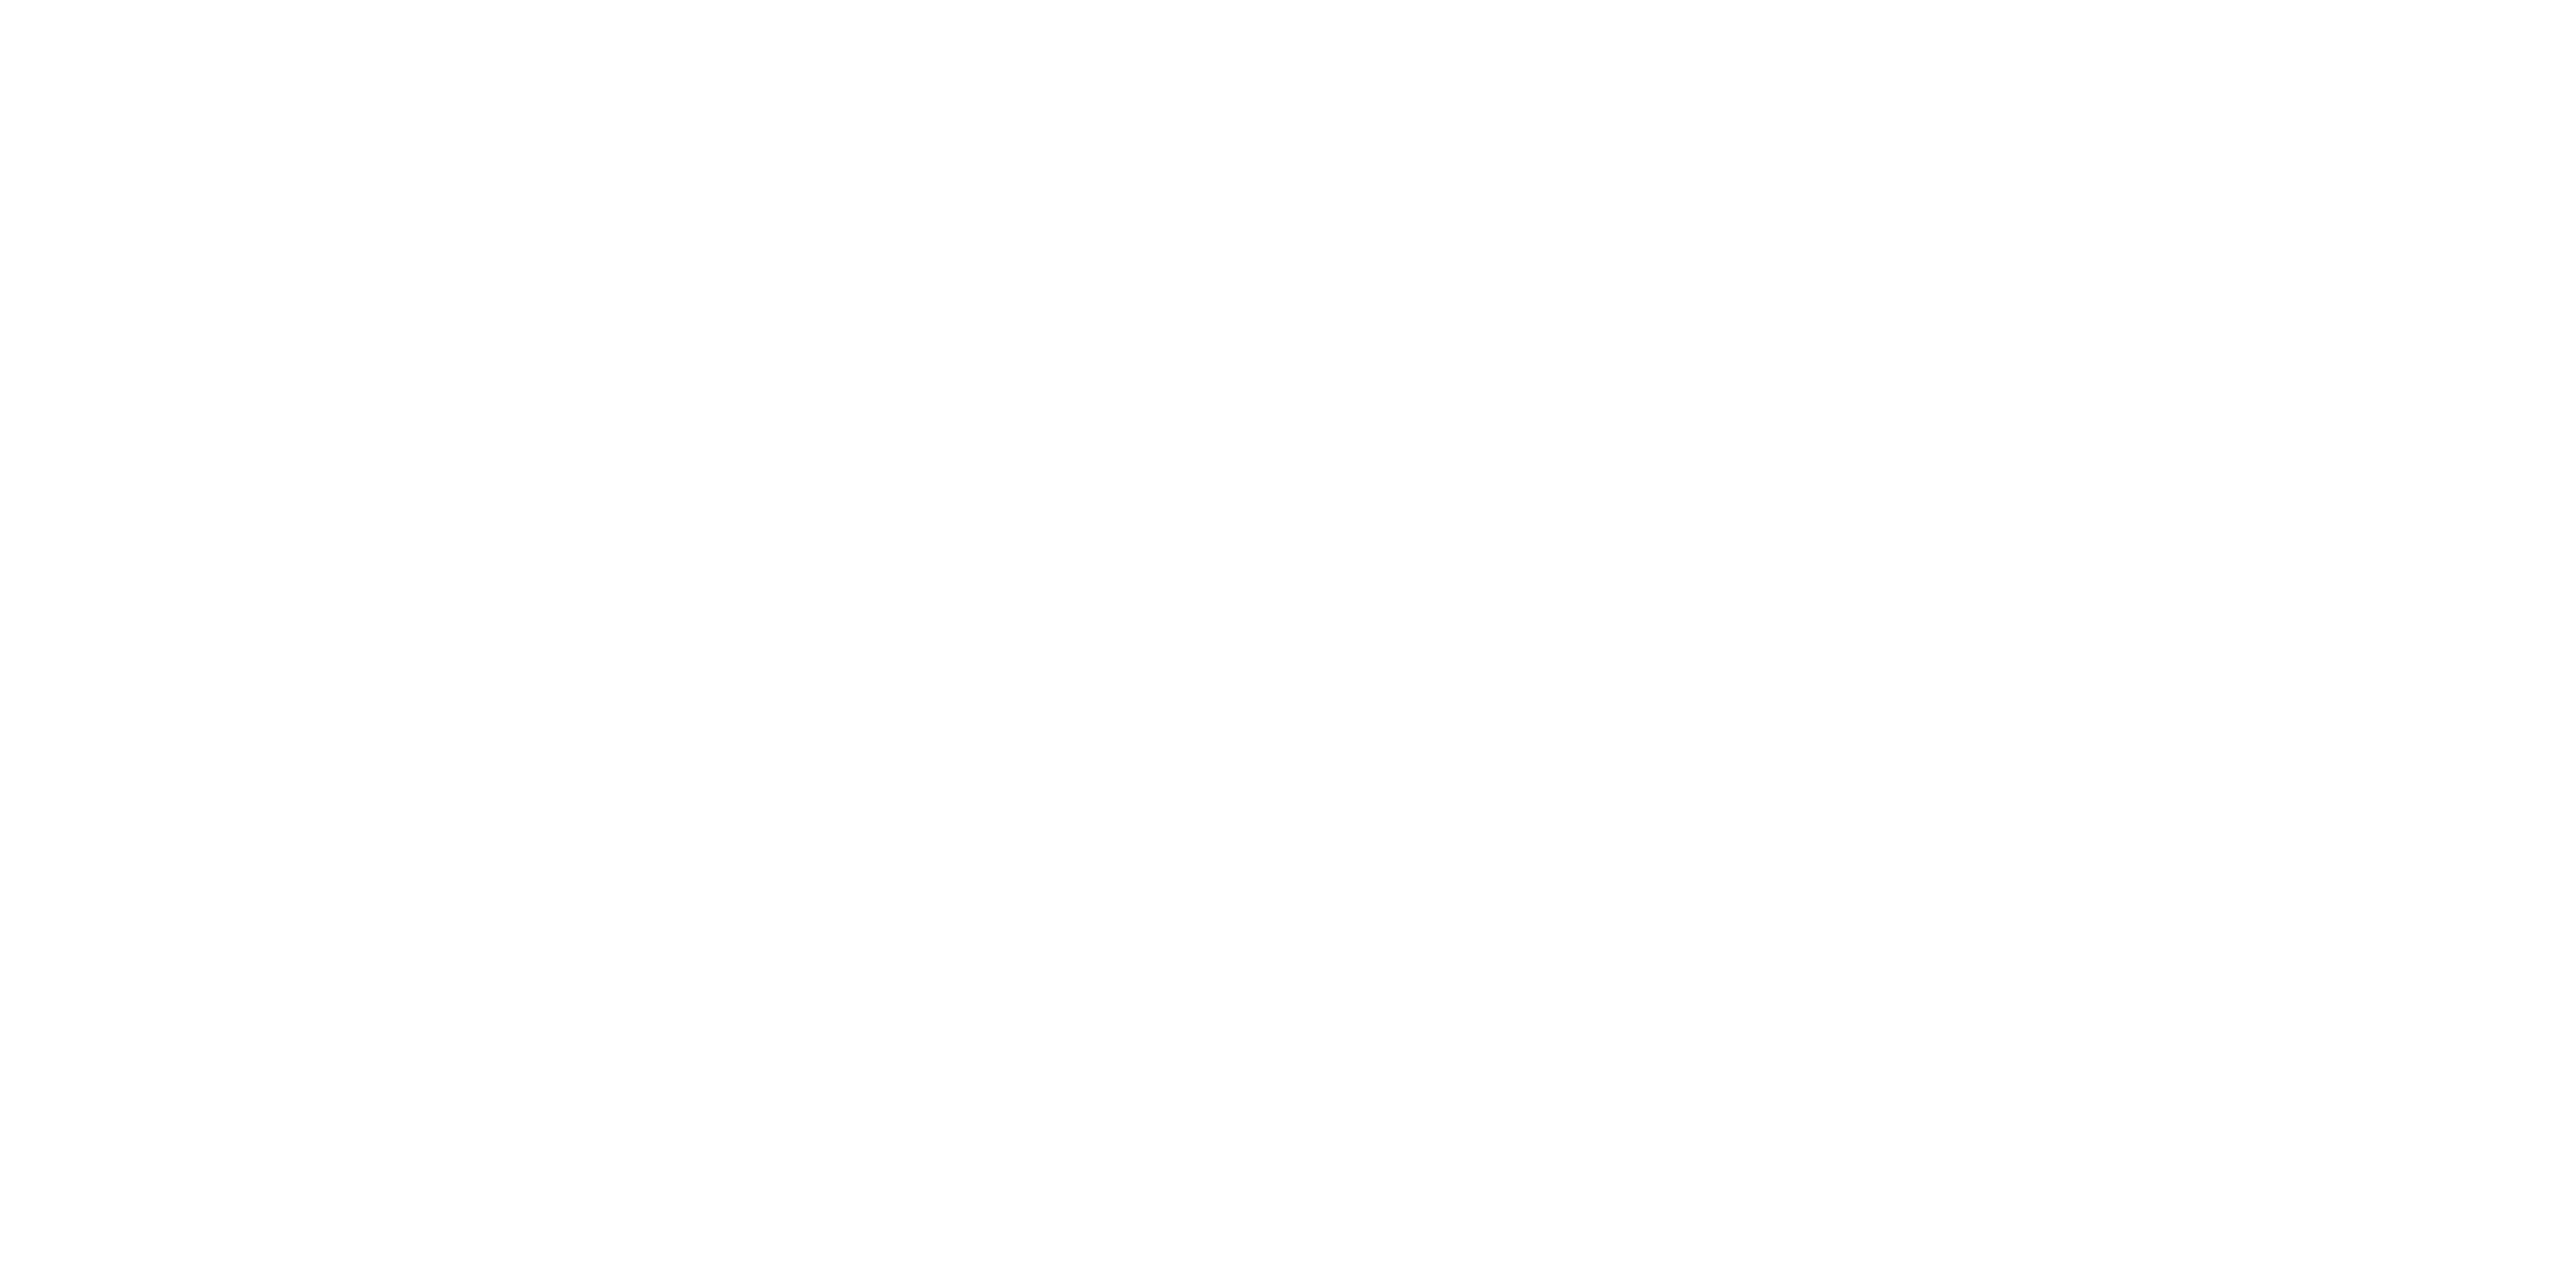 https://coolautomation.com/wp-content/uploads/sites/2/2022/01/Diagram_touch-screen.png